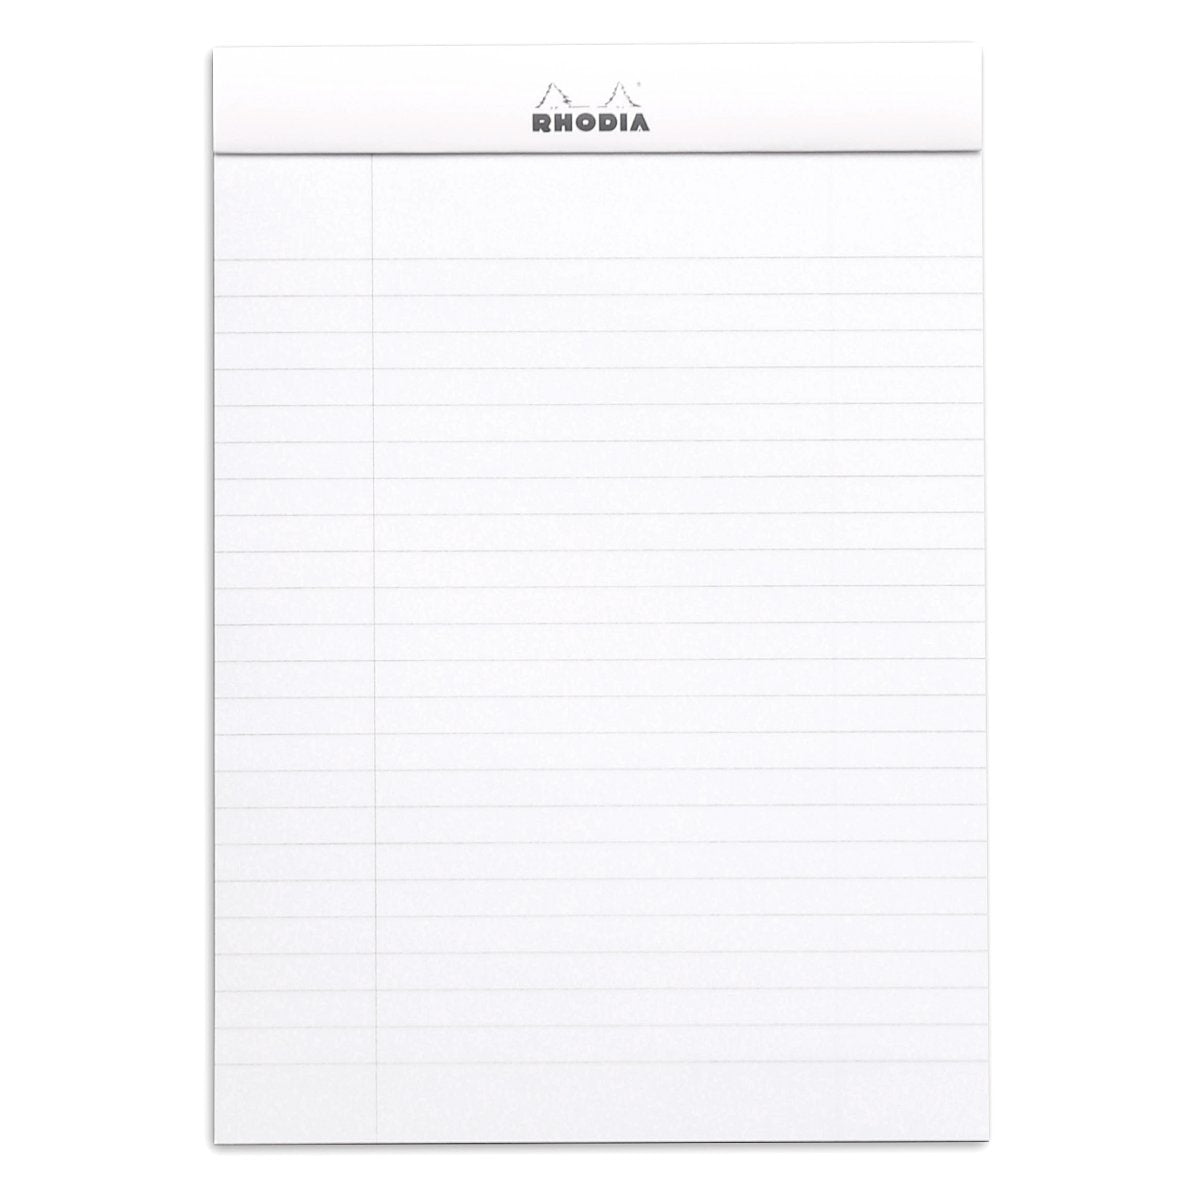 Rhodia White - A5 white lined with margin